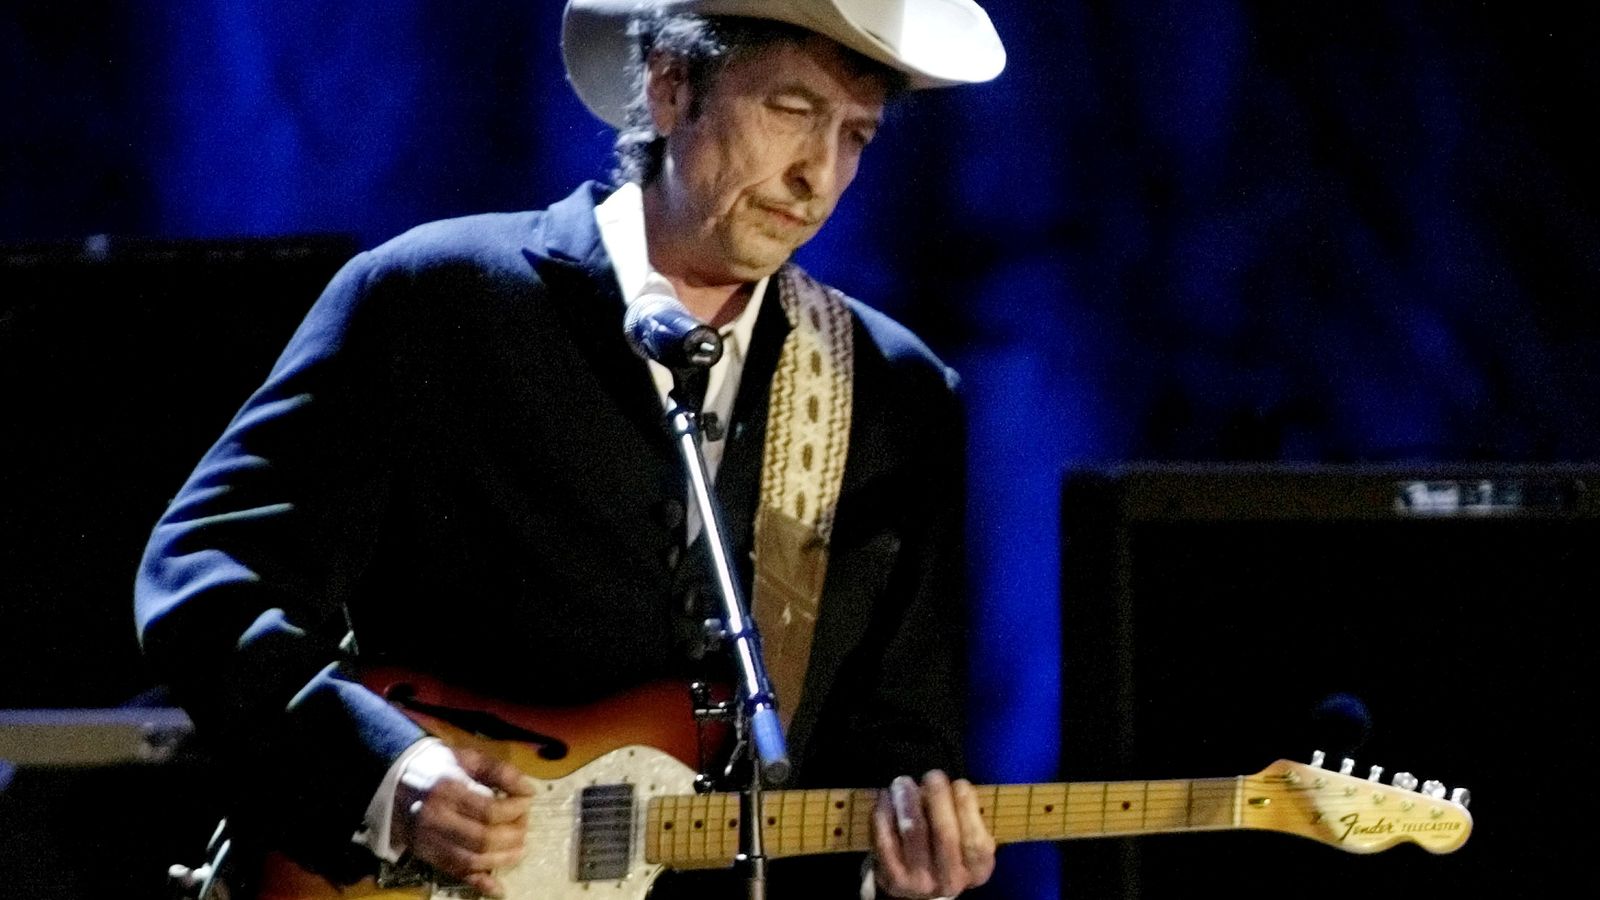 Bob Dylan accused of sexually abusing girl, 12, in the 1960s